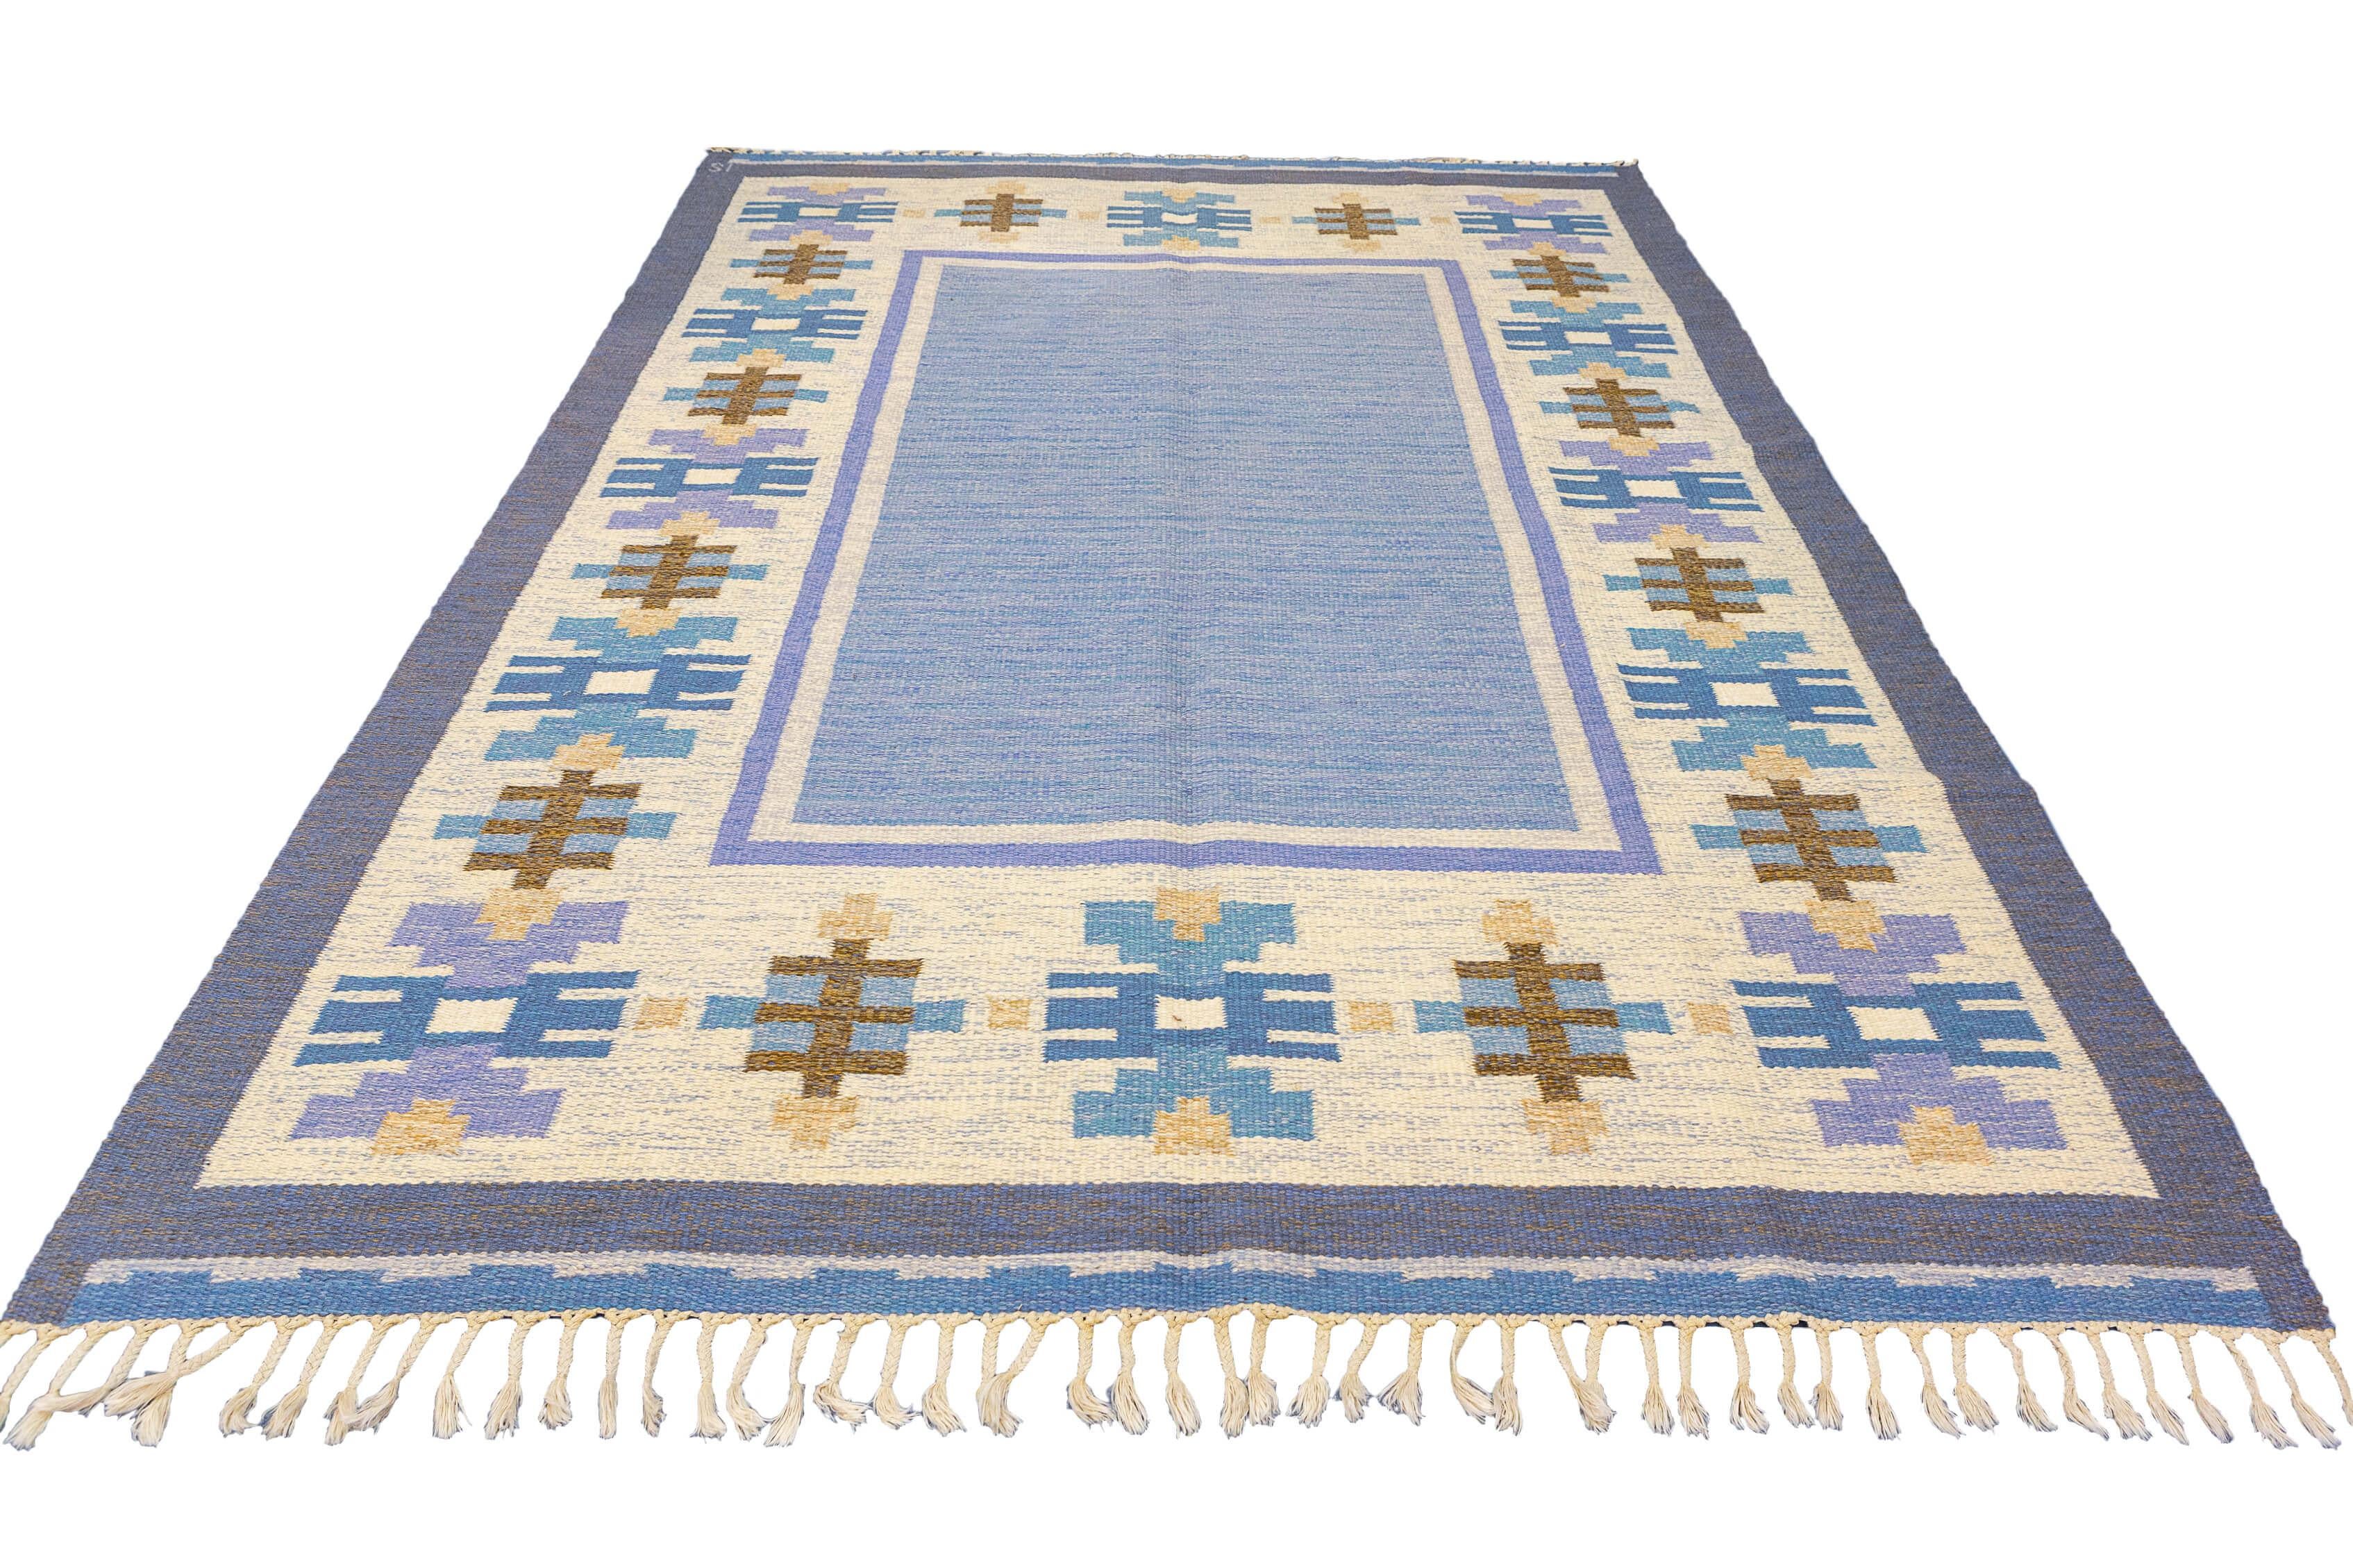 This captivating Scandinavian Rollakan Swedish Rug features a soft color palette encompassing shades of blue, beige, and brown, creating a serene and inviting atmosphere. The combination of these gentle hues evokes a sense of tranquility and